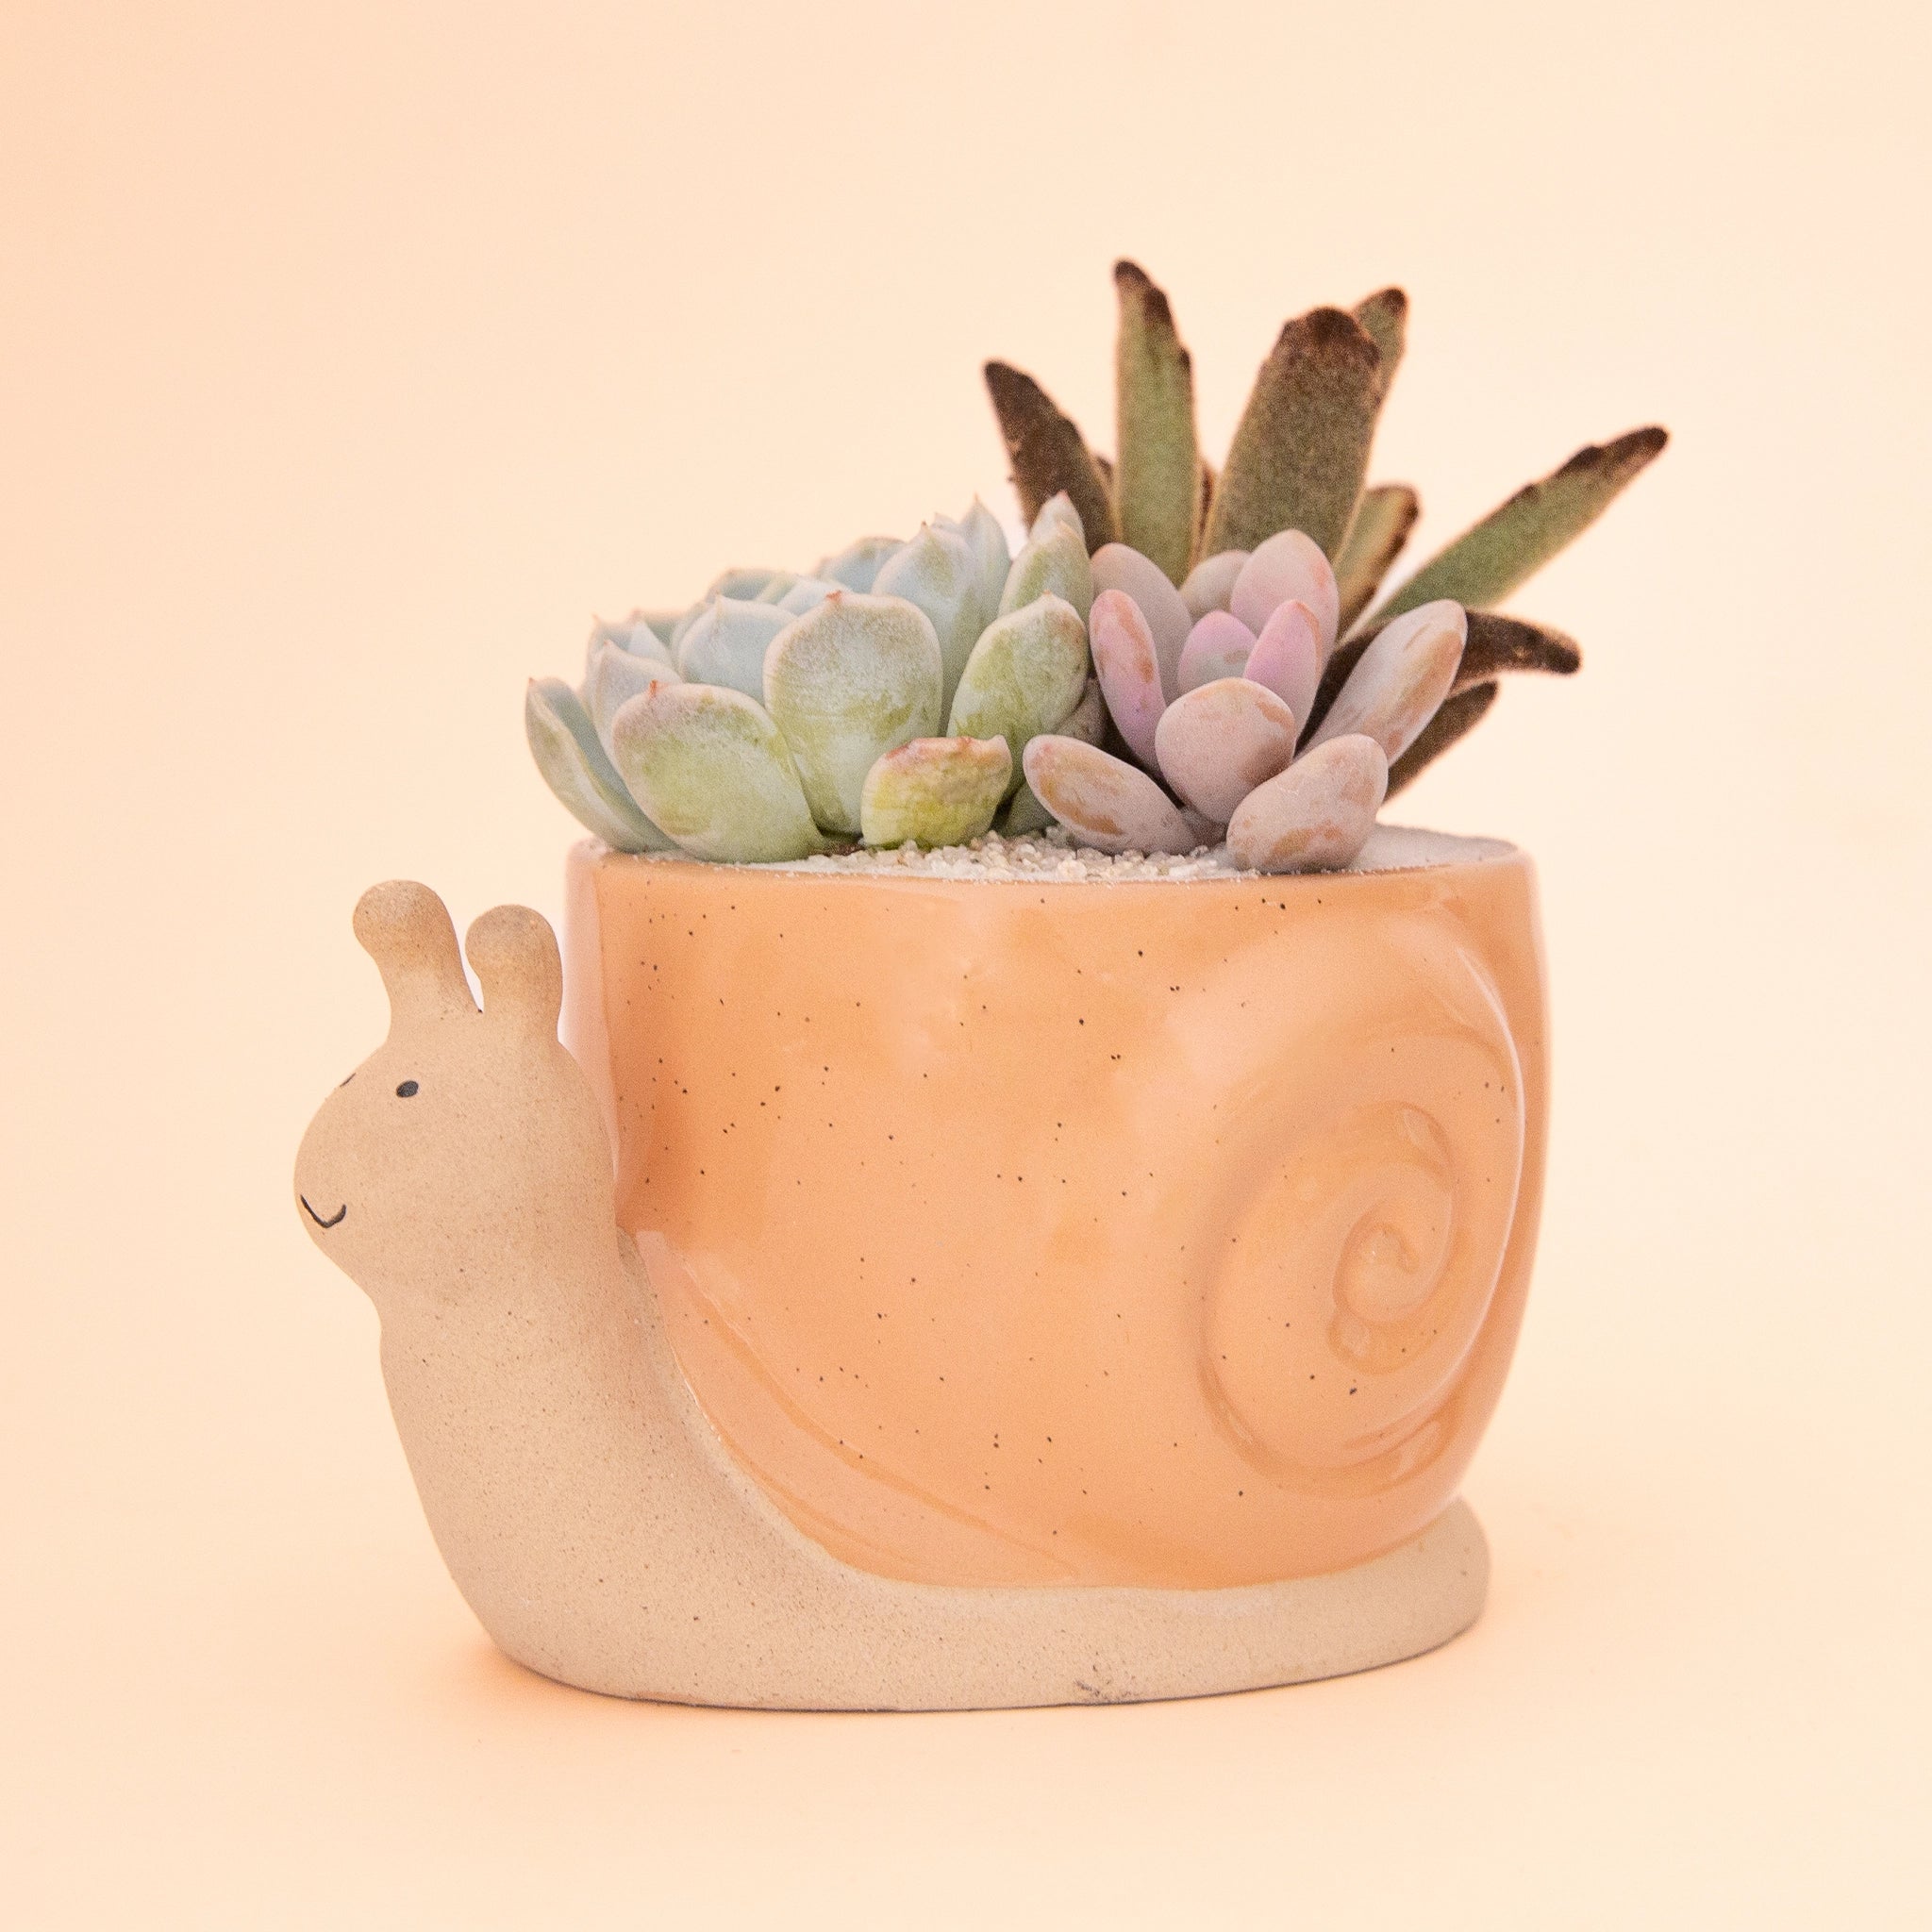 On a peachy background is an orange snail shaped planter filled with a cactus and succulent arrangement. 